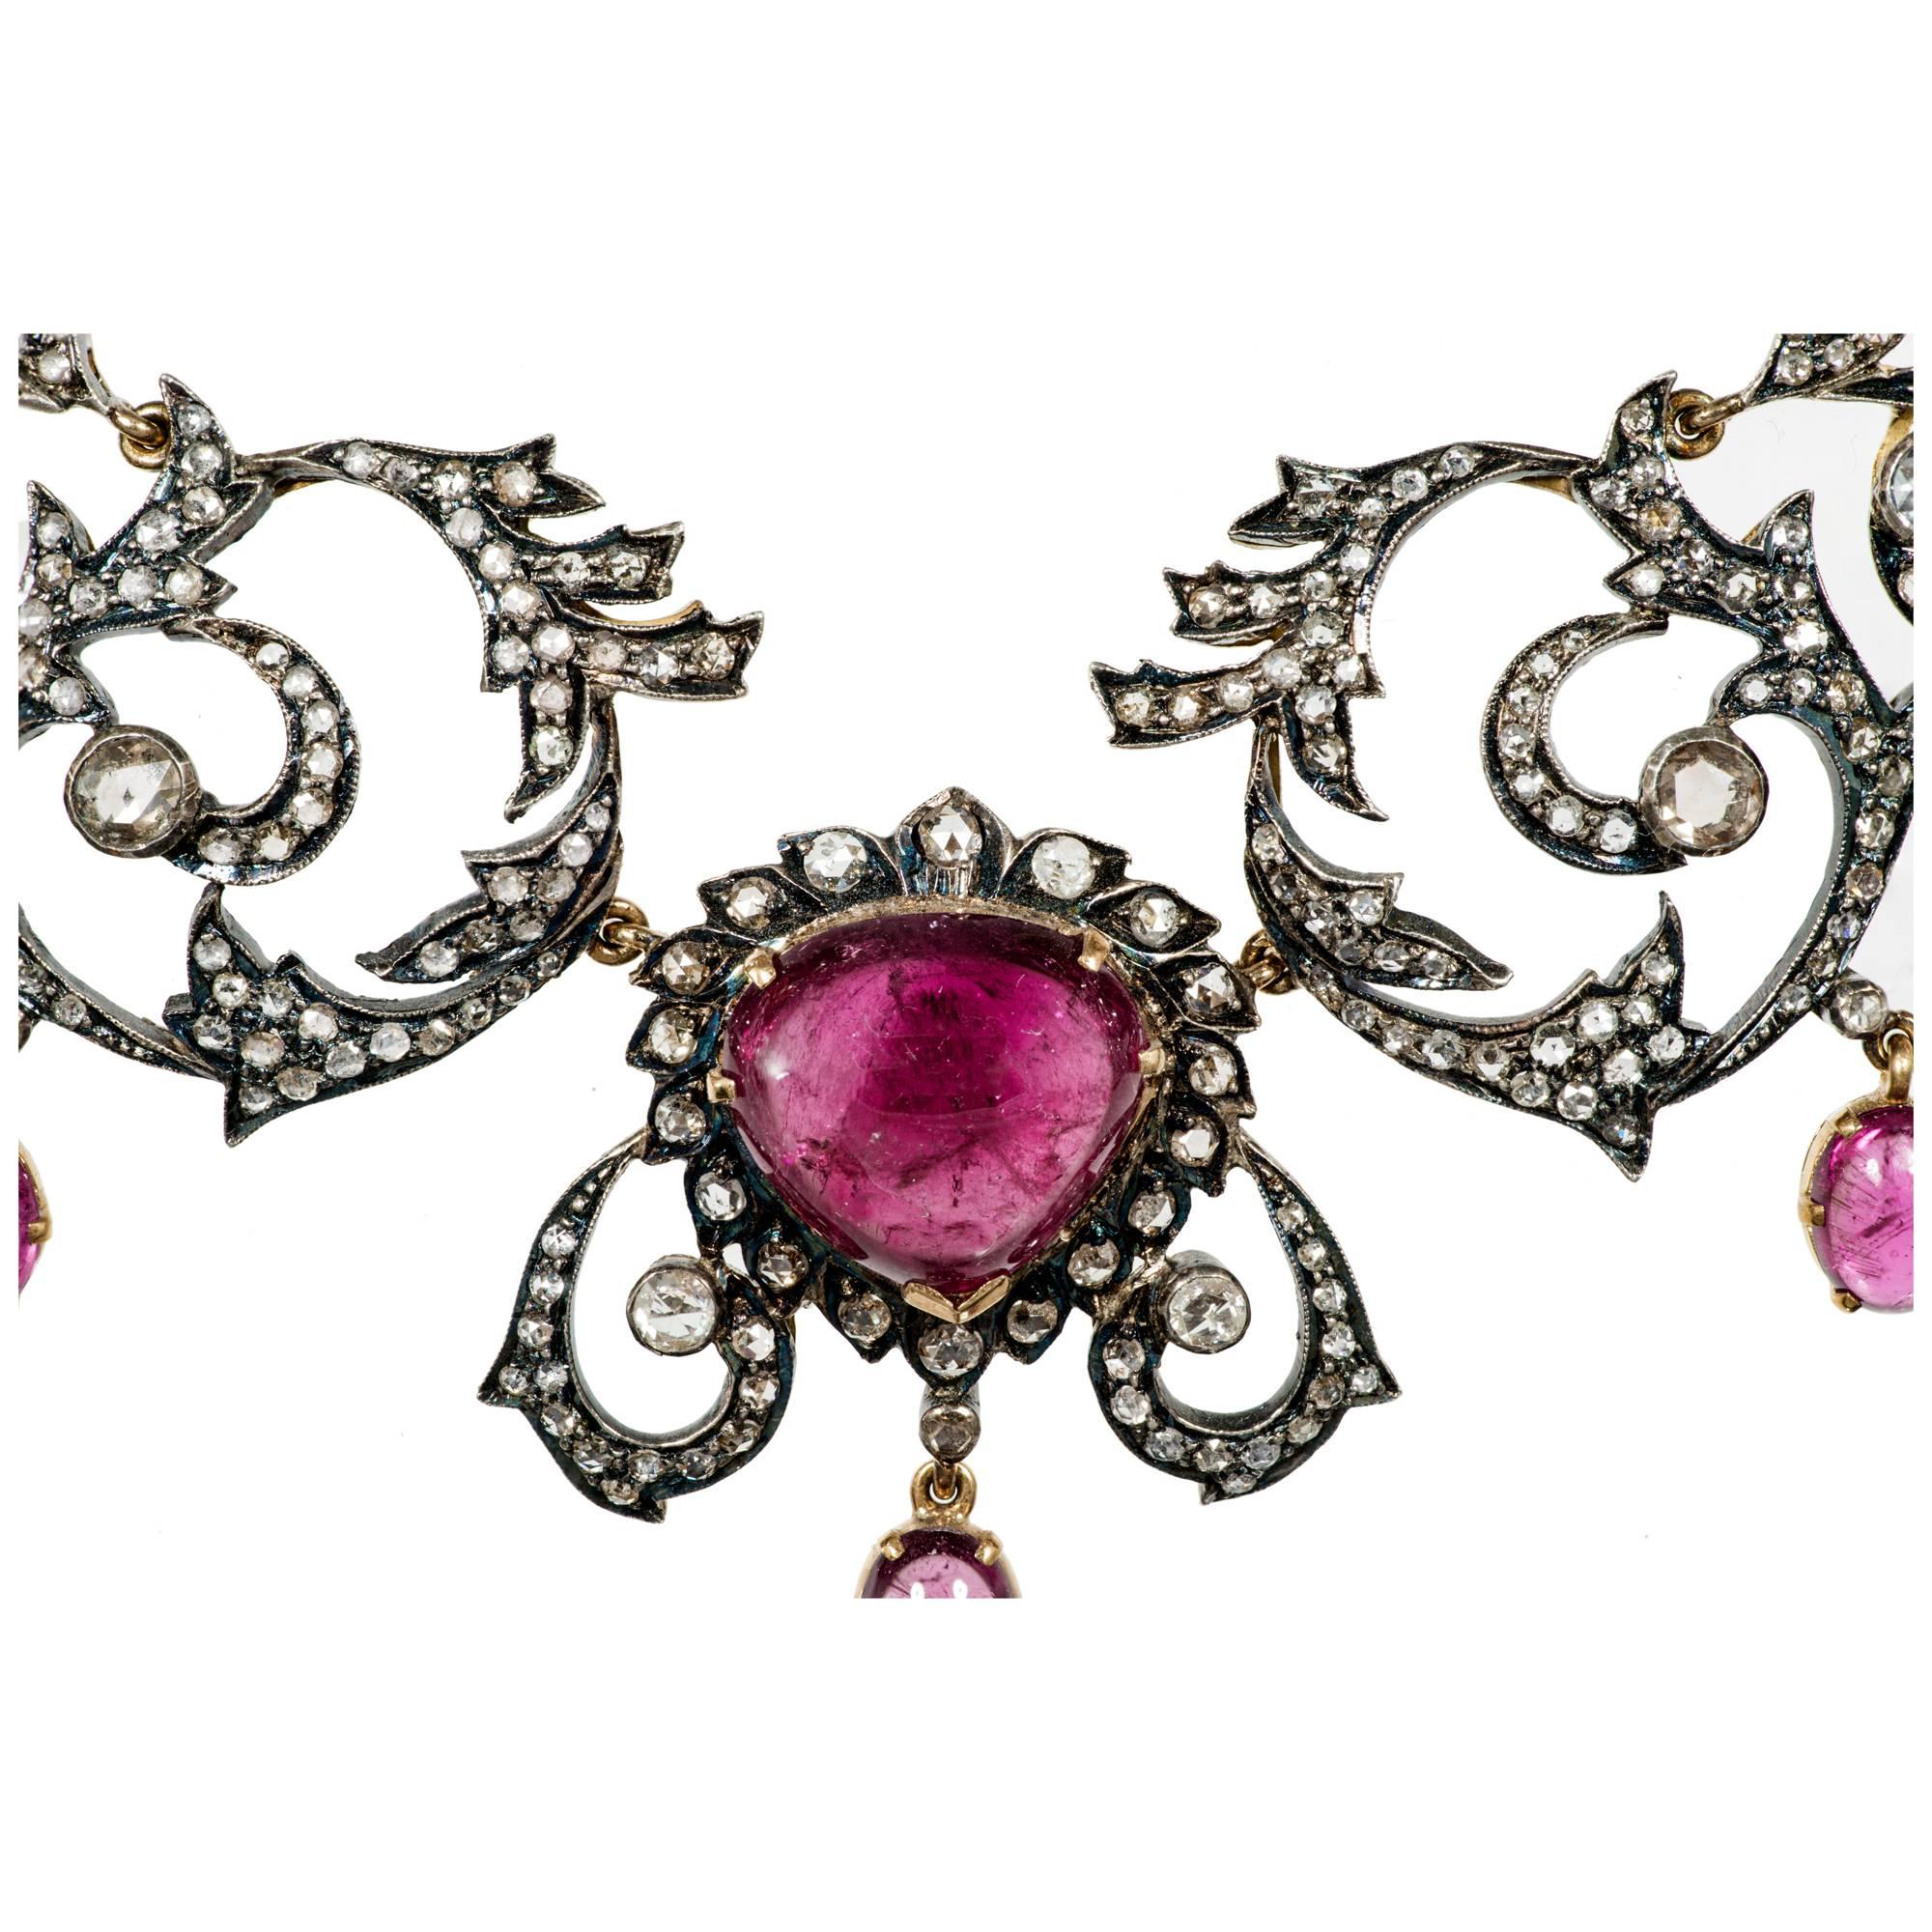 Circa 1890's pink oval tourmaline and round diamond pendant necklace. Handmade 14k gold with silver tops. Set with rose cut diamonds. Natural patina.

24 Pink tourmalines approx. weight. 25.00cts
425 Mixed diamonds  approx. weight. 6.50cts
14k